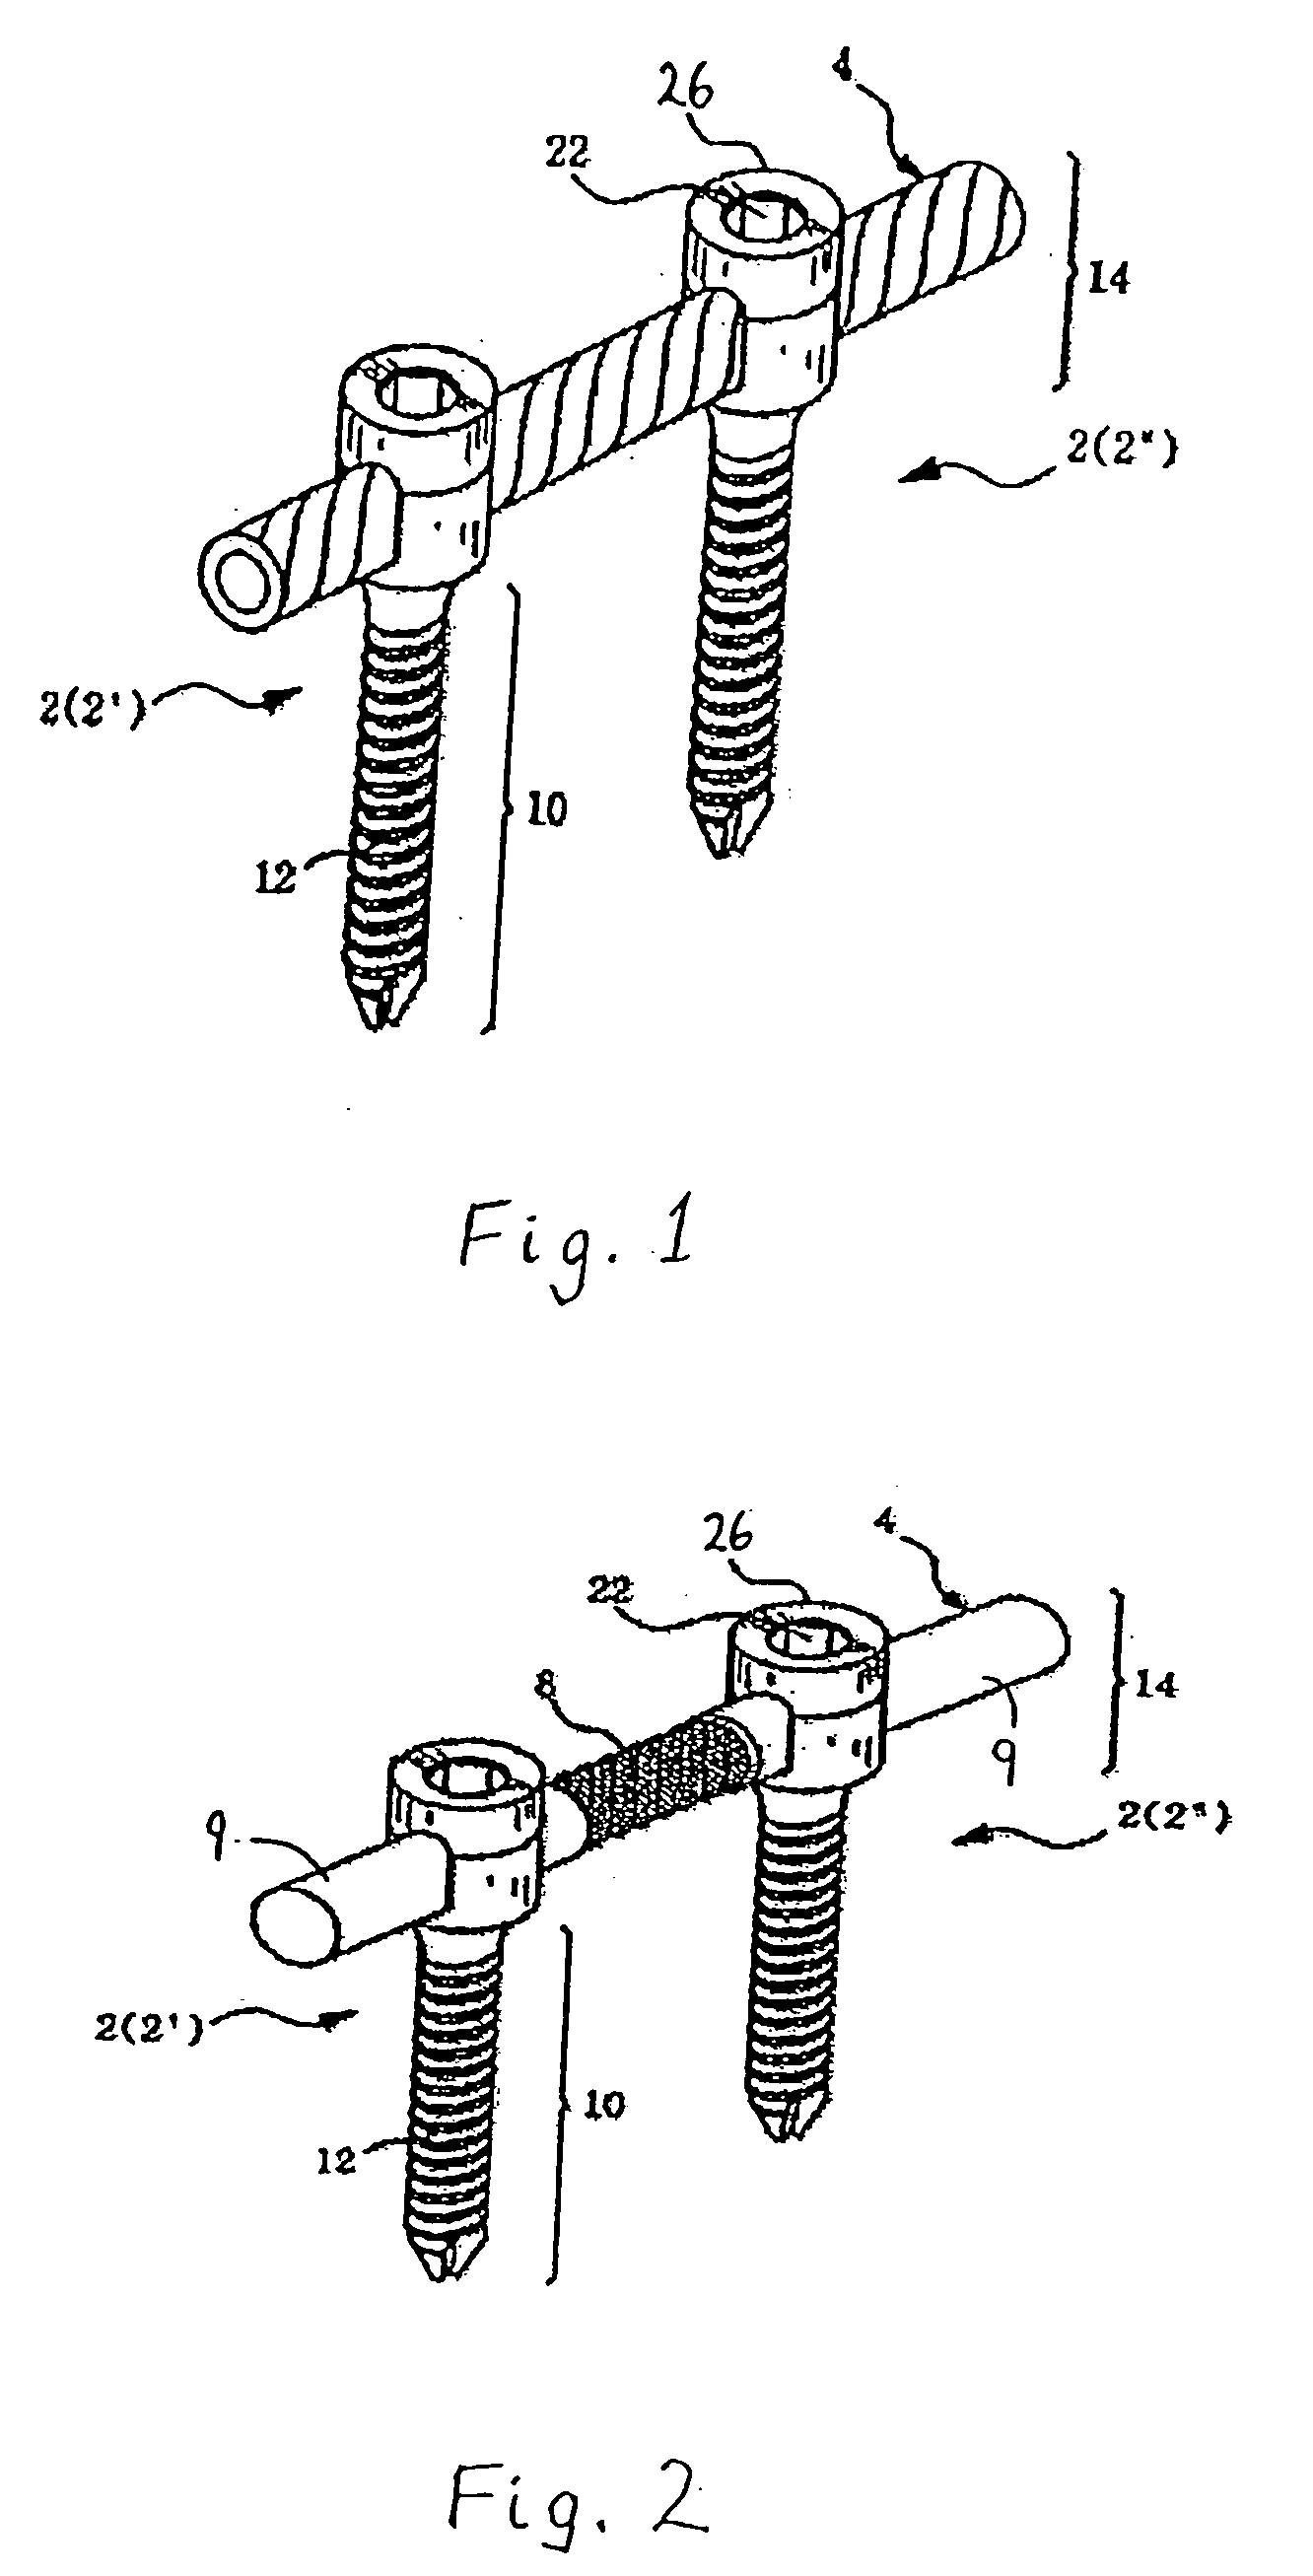 Method and apparatus for flexible fixation of a spine